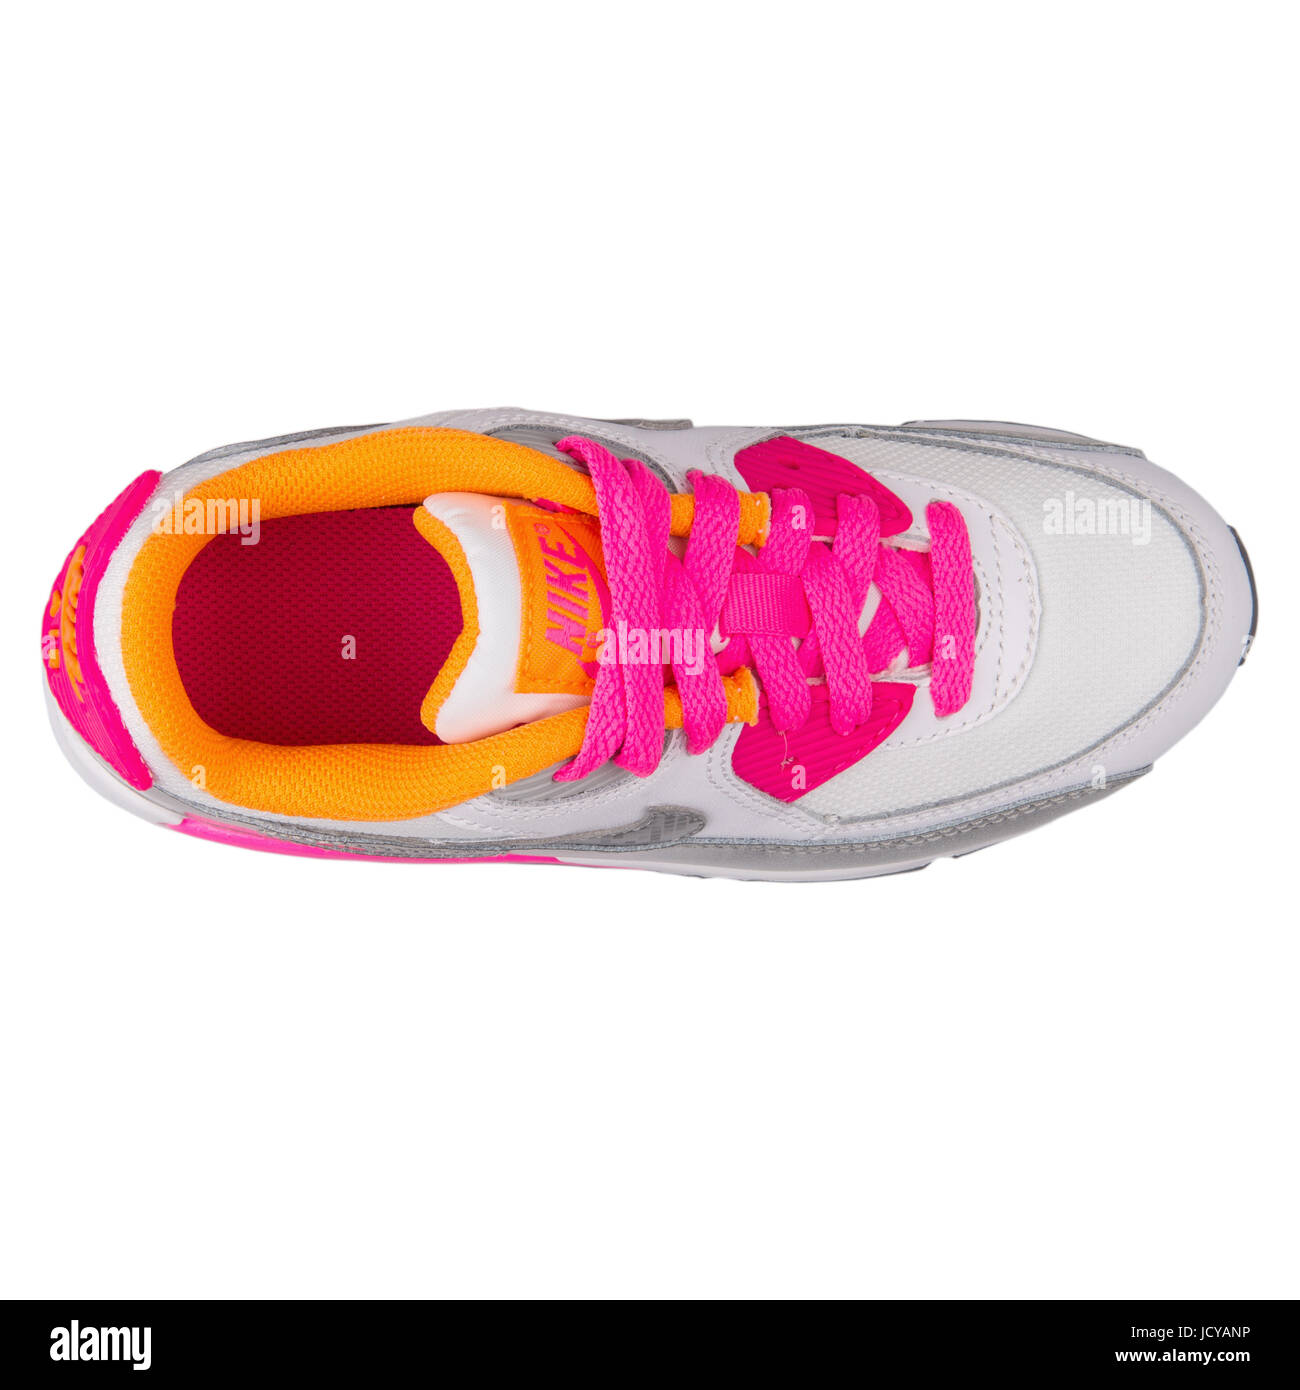 Nike Air Max 90 Mesh (PS) White, Silver and Pink Kid's Running Shoes -  724856-101 Stock Photo - Alamy